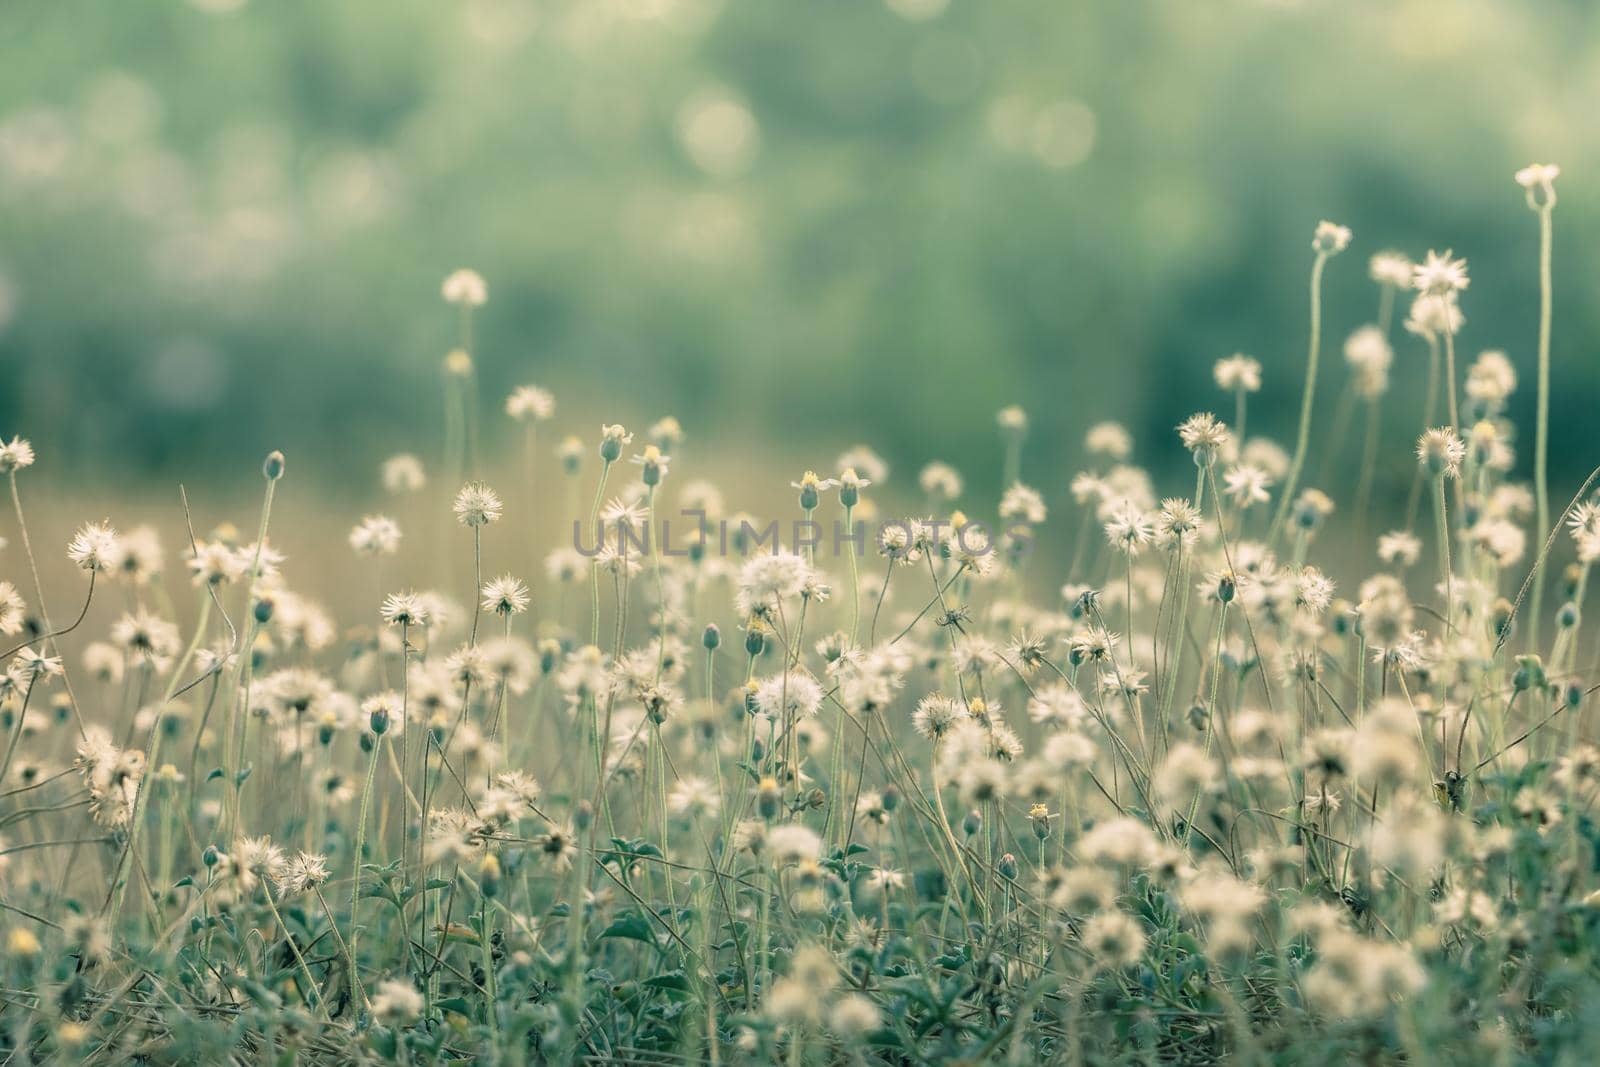 Meadow flowers, beautiful fresh morning in soft warm light. Vintage autumn landscape blurry natural background.